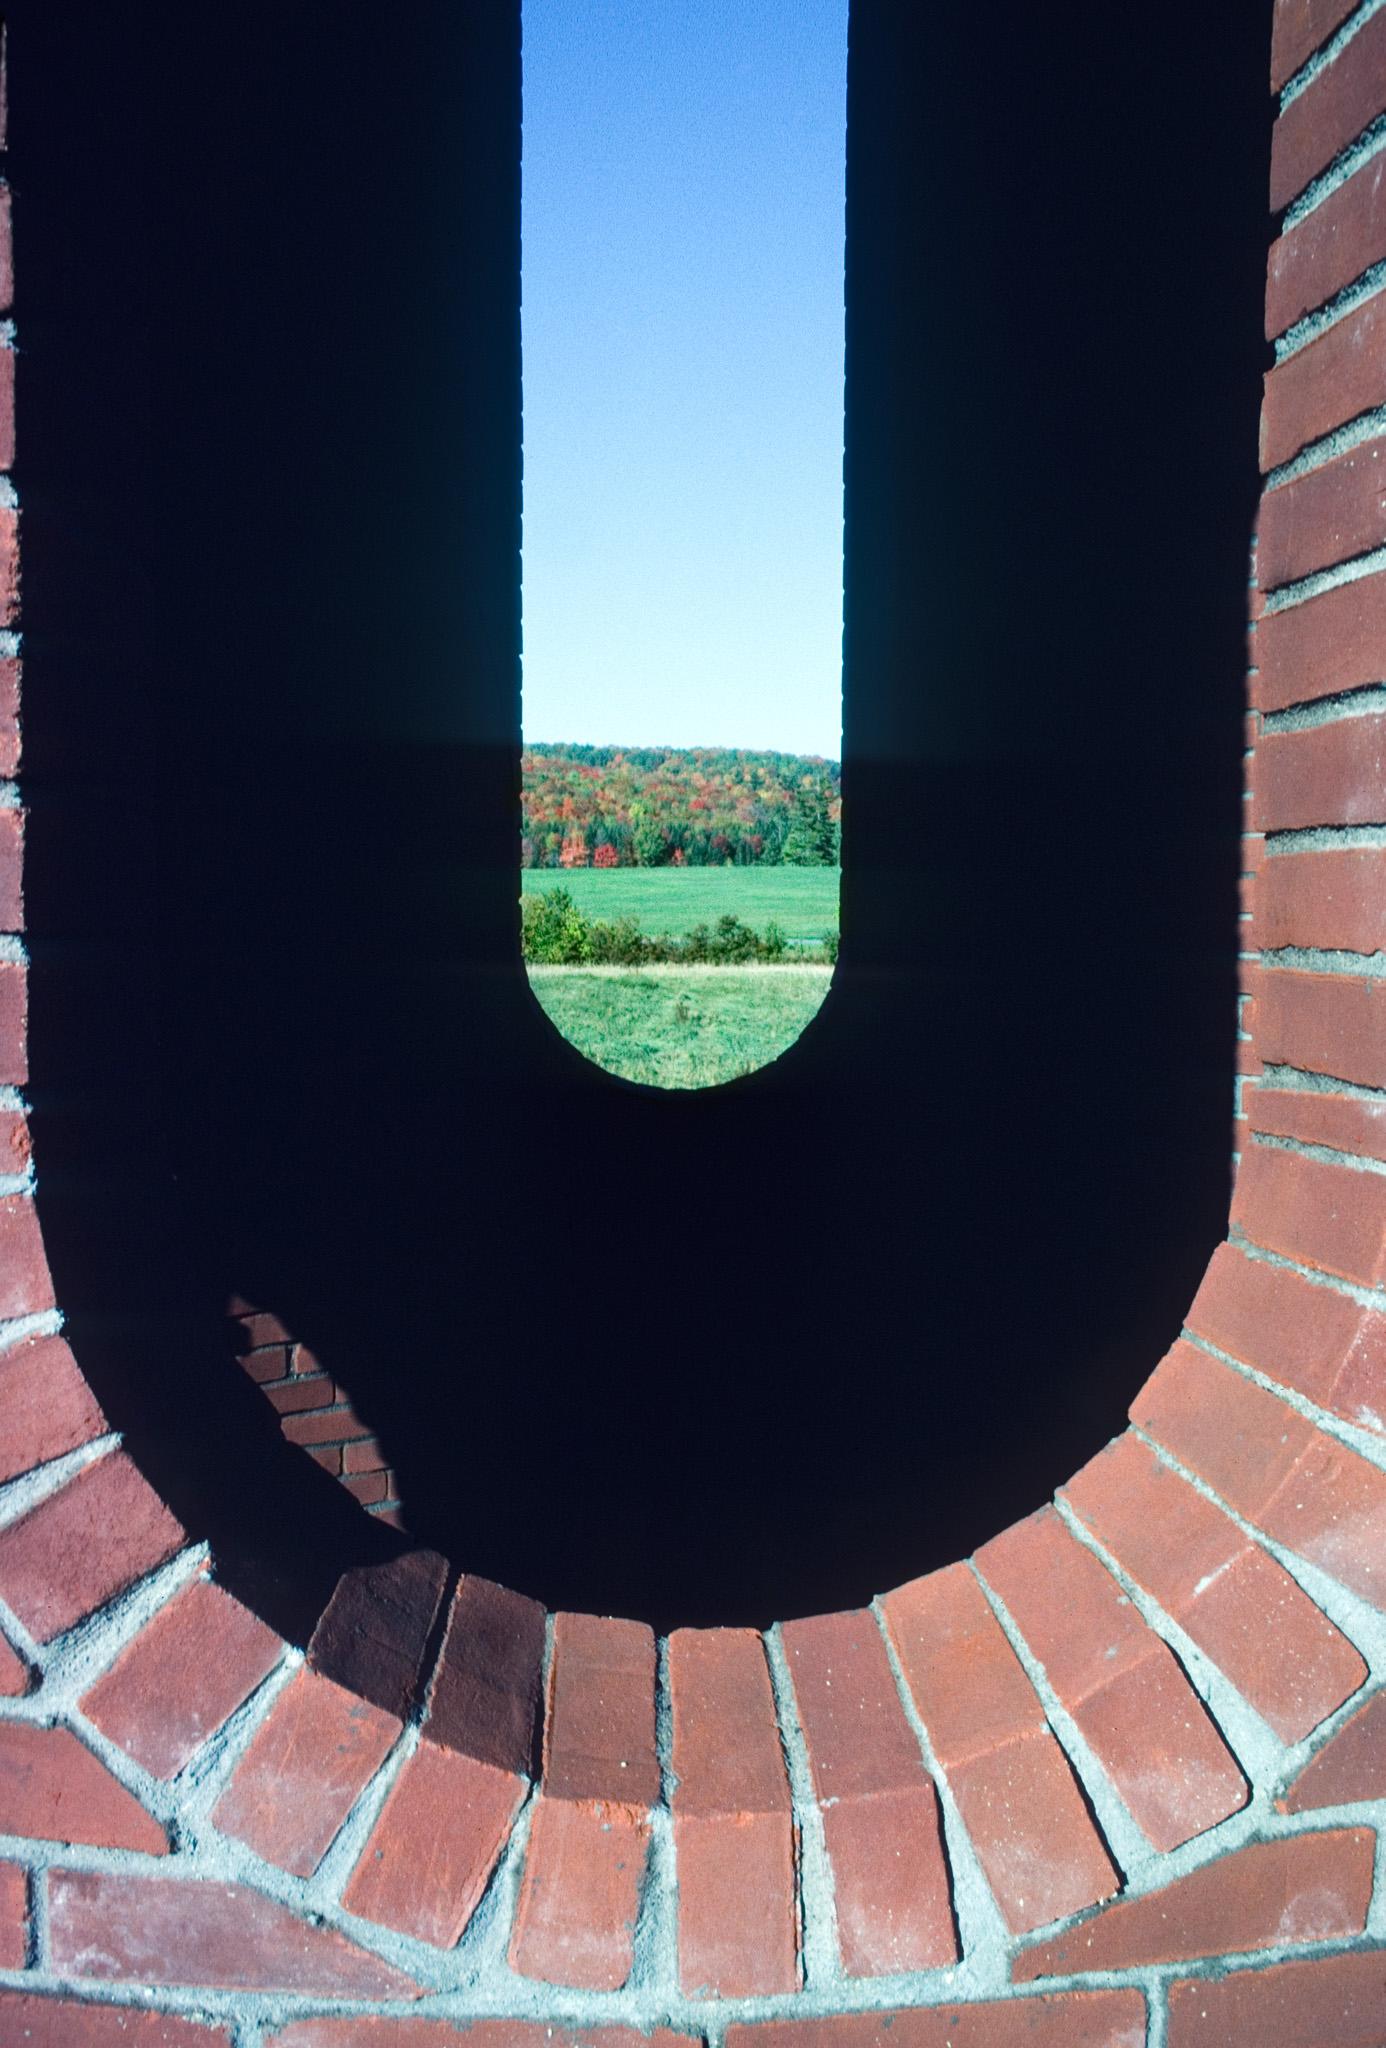 looking through two oval shaped windows in a brick structure